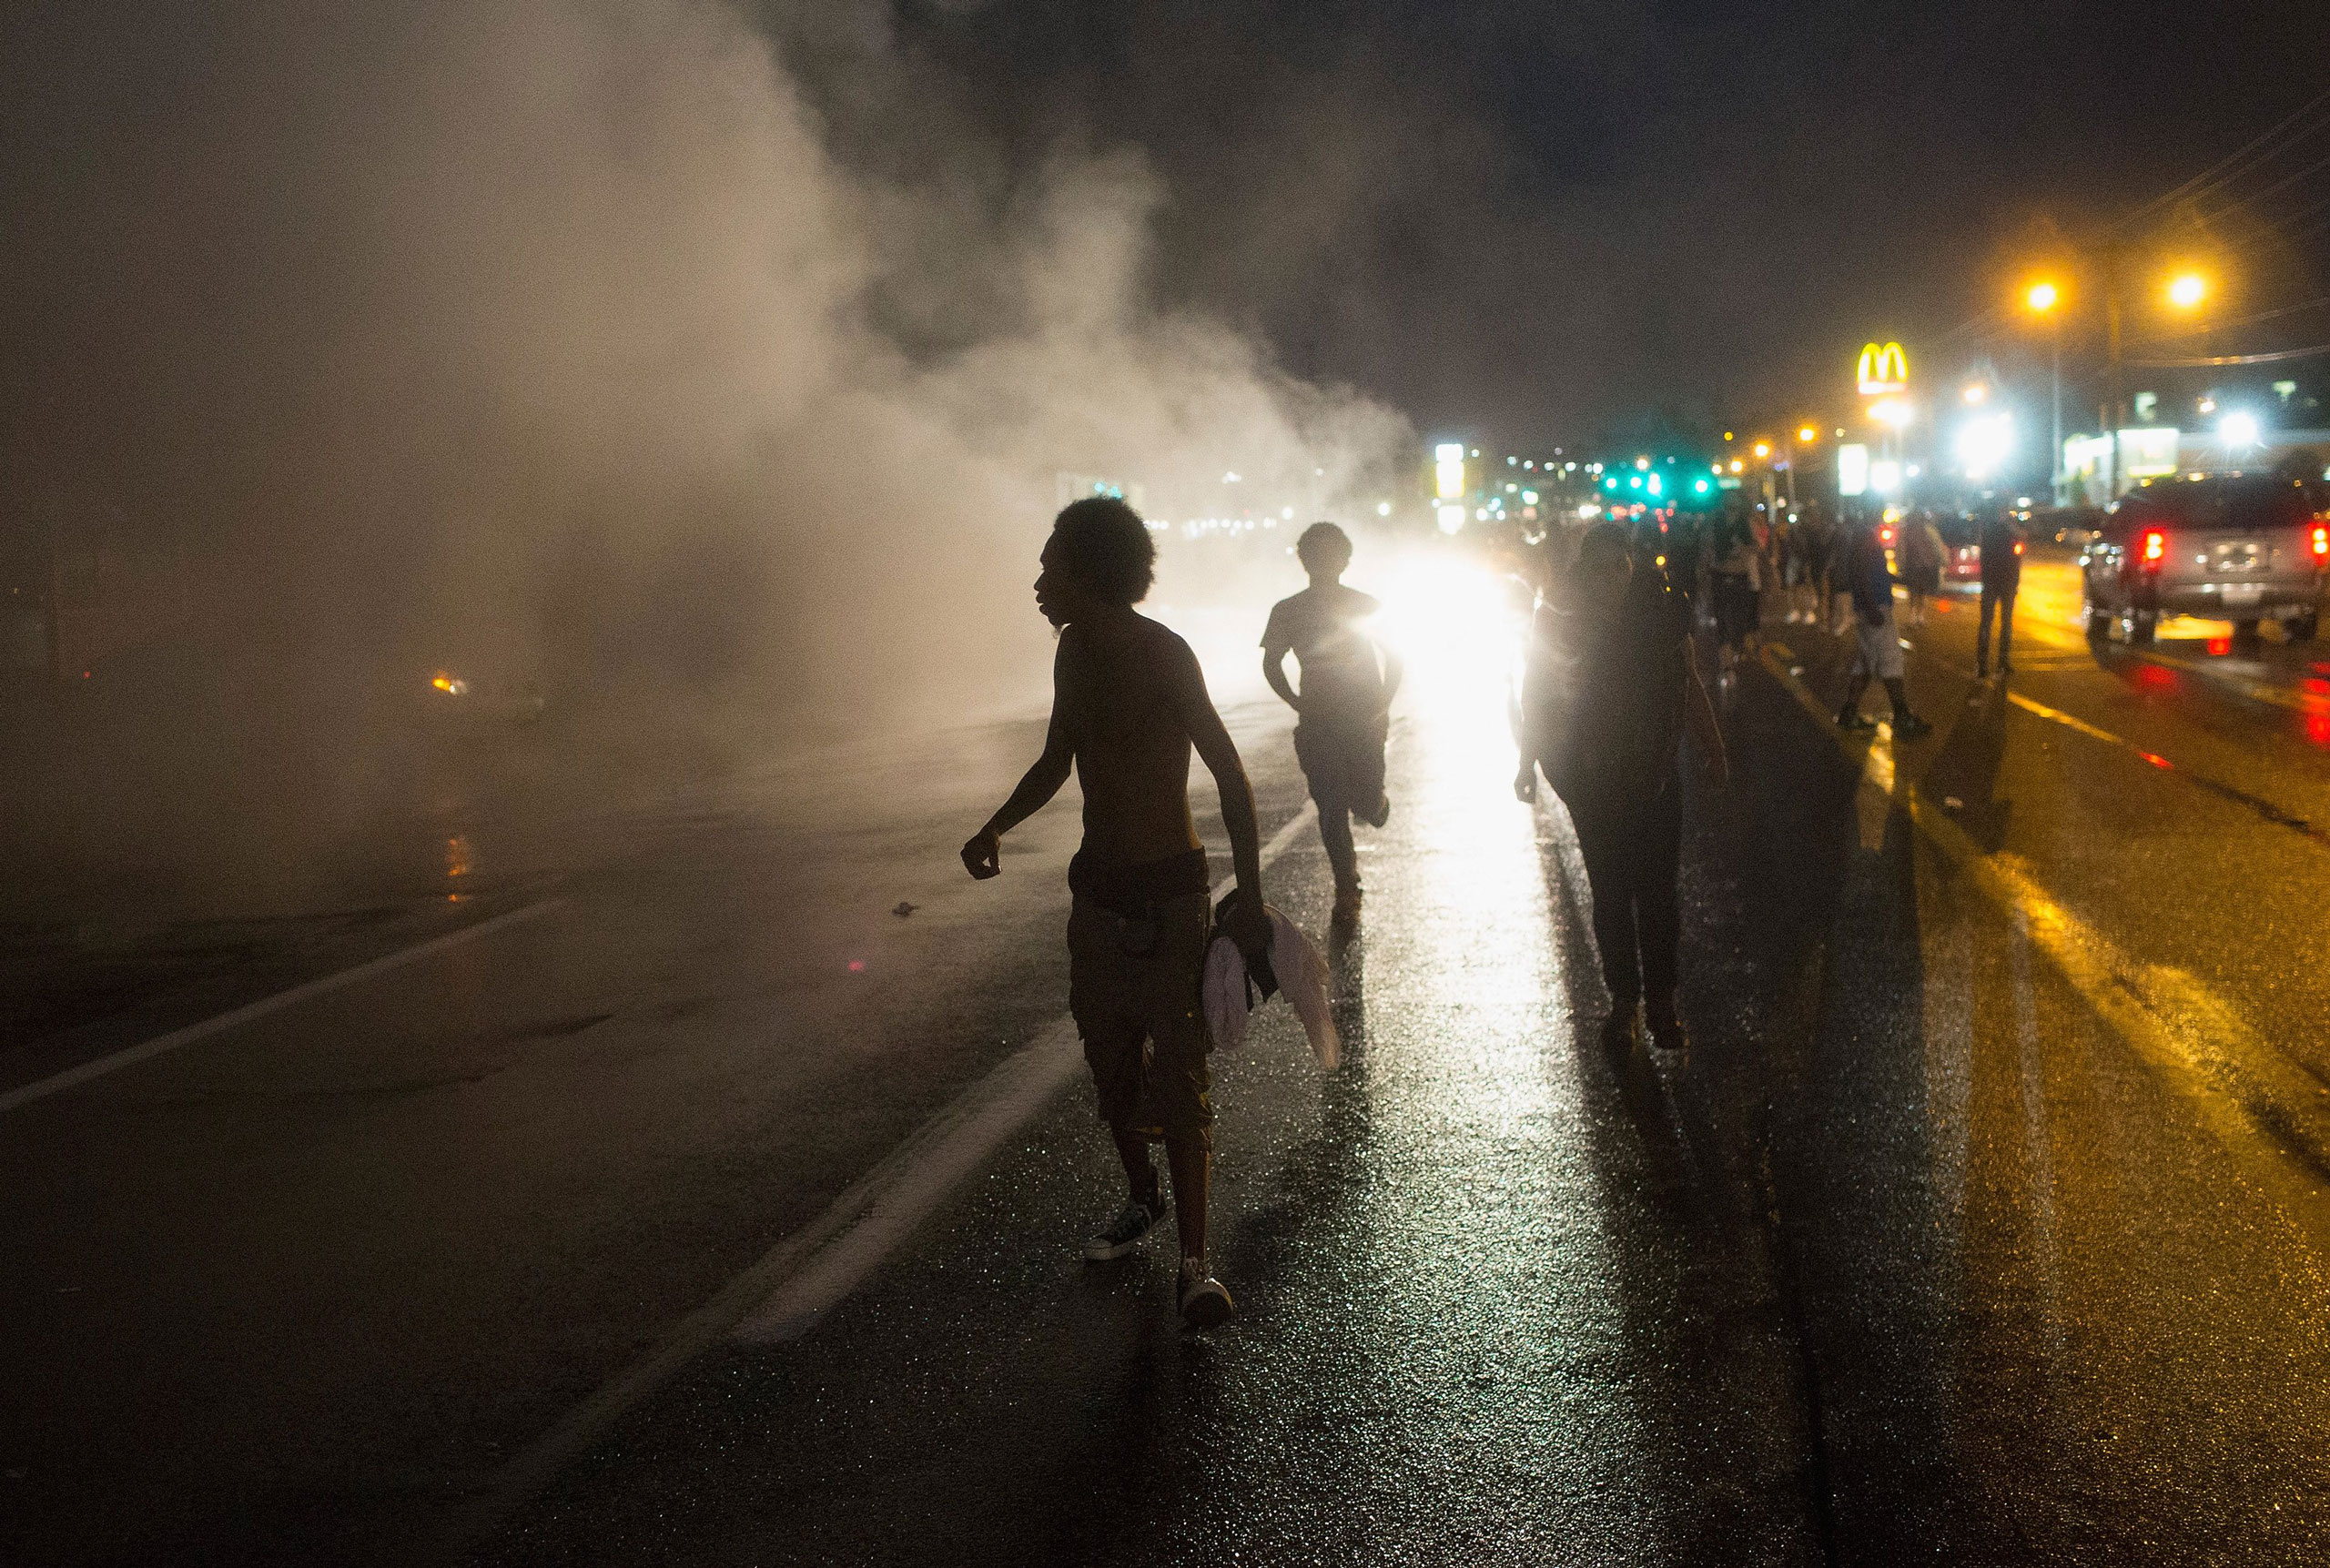 Demonstrators, marking the one-year anniversary of the shooting of Michael Brown, march along West Florrisant Street in Ferguson, Mo., on August 9, 2015.